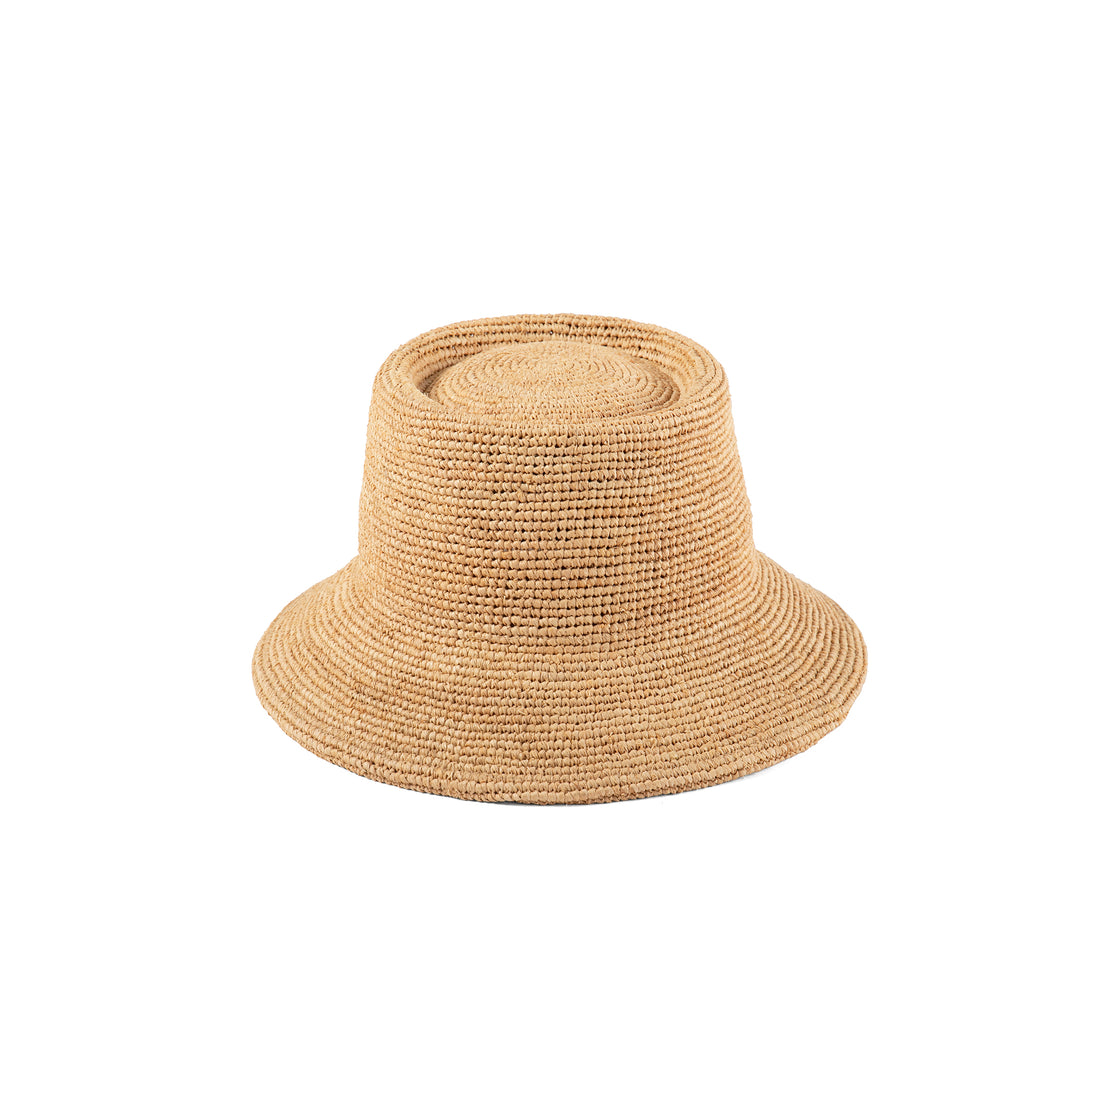 Dipped The Inca Bucket - Straw Bucket Hat in Natural | Lack of Color US